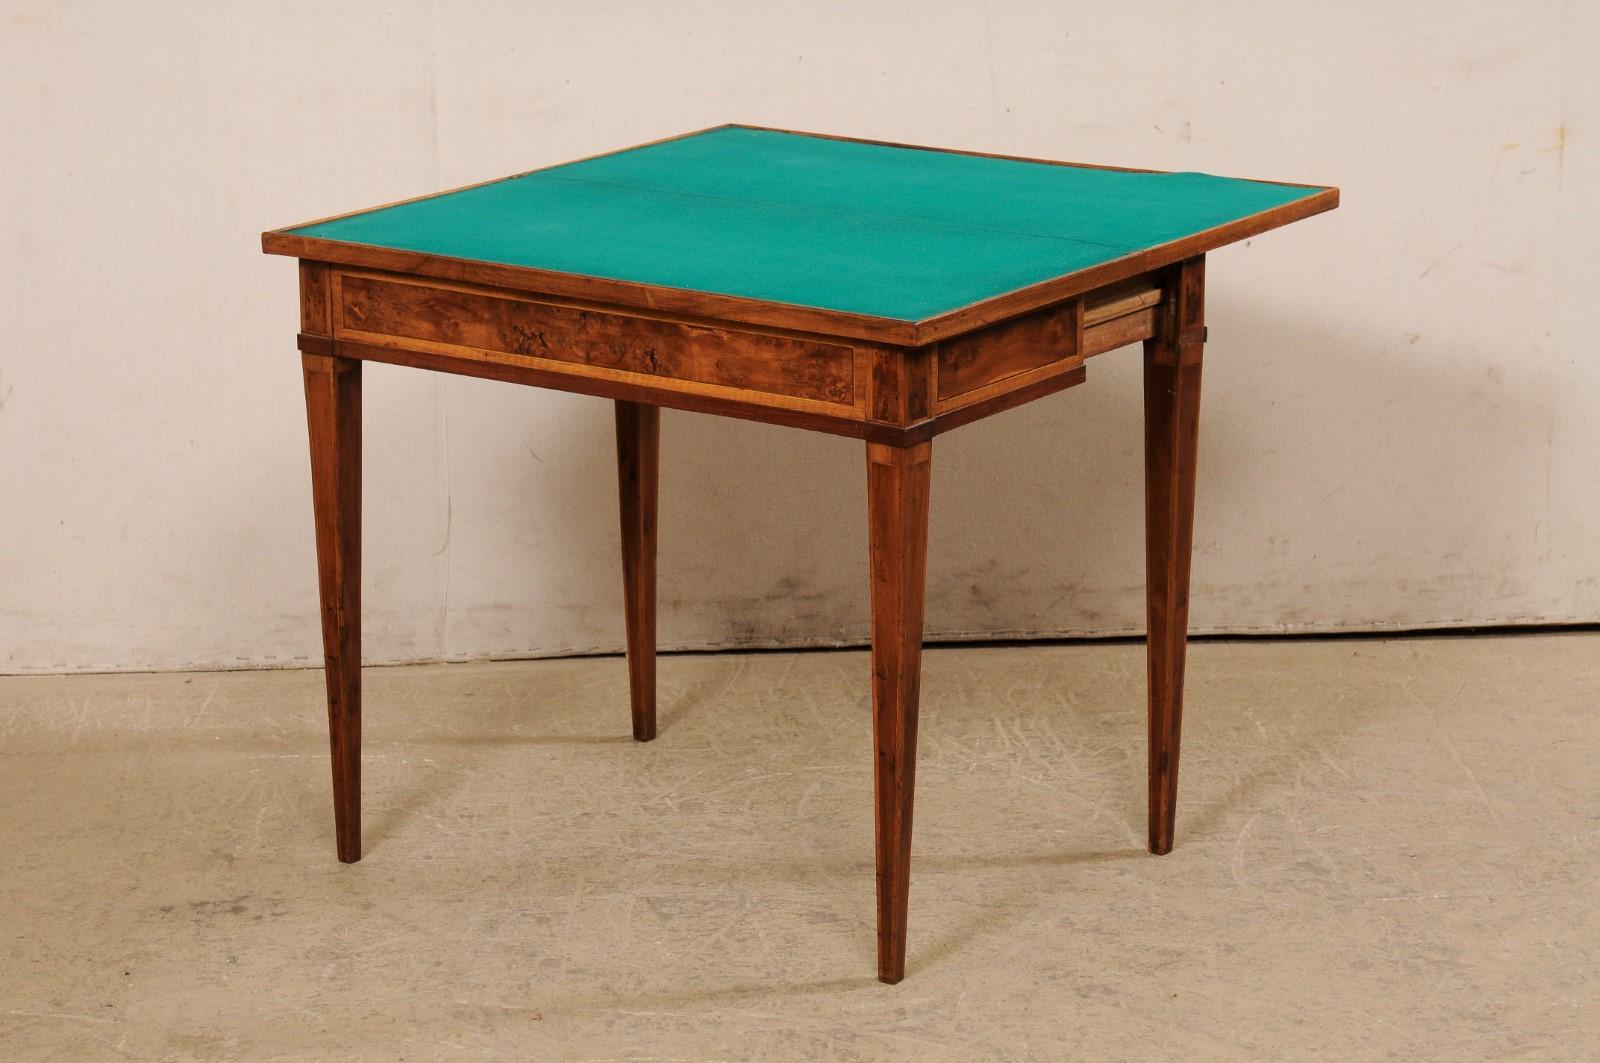 19th C. French Petite-Size Flip Top Table 'Transitional to a Card/Games Table' For Sale 6